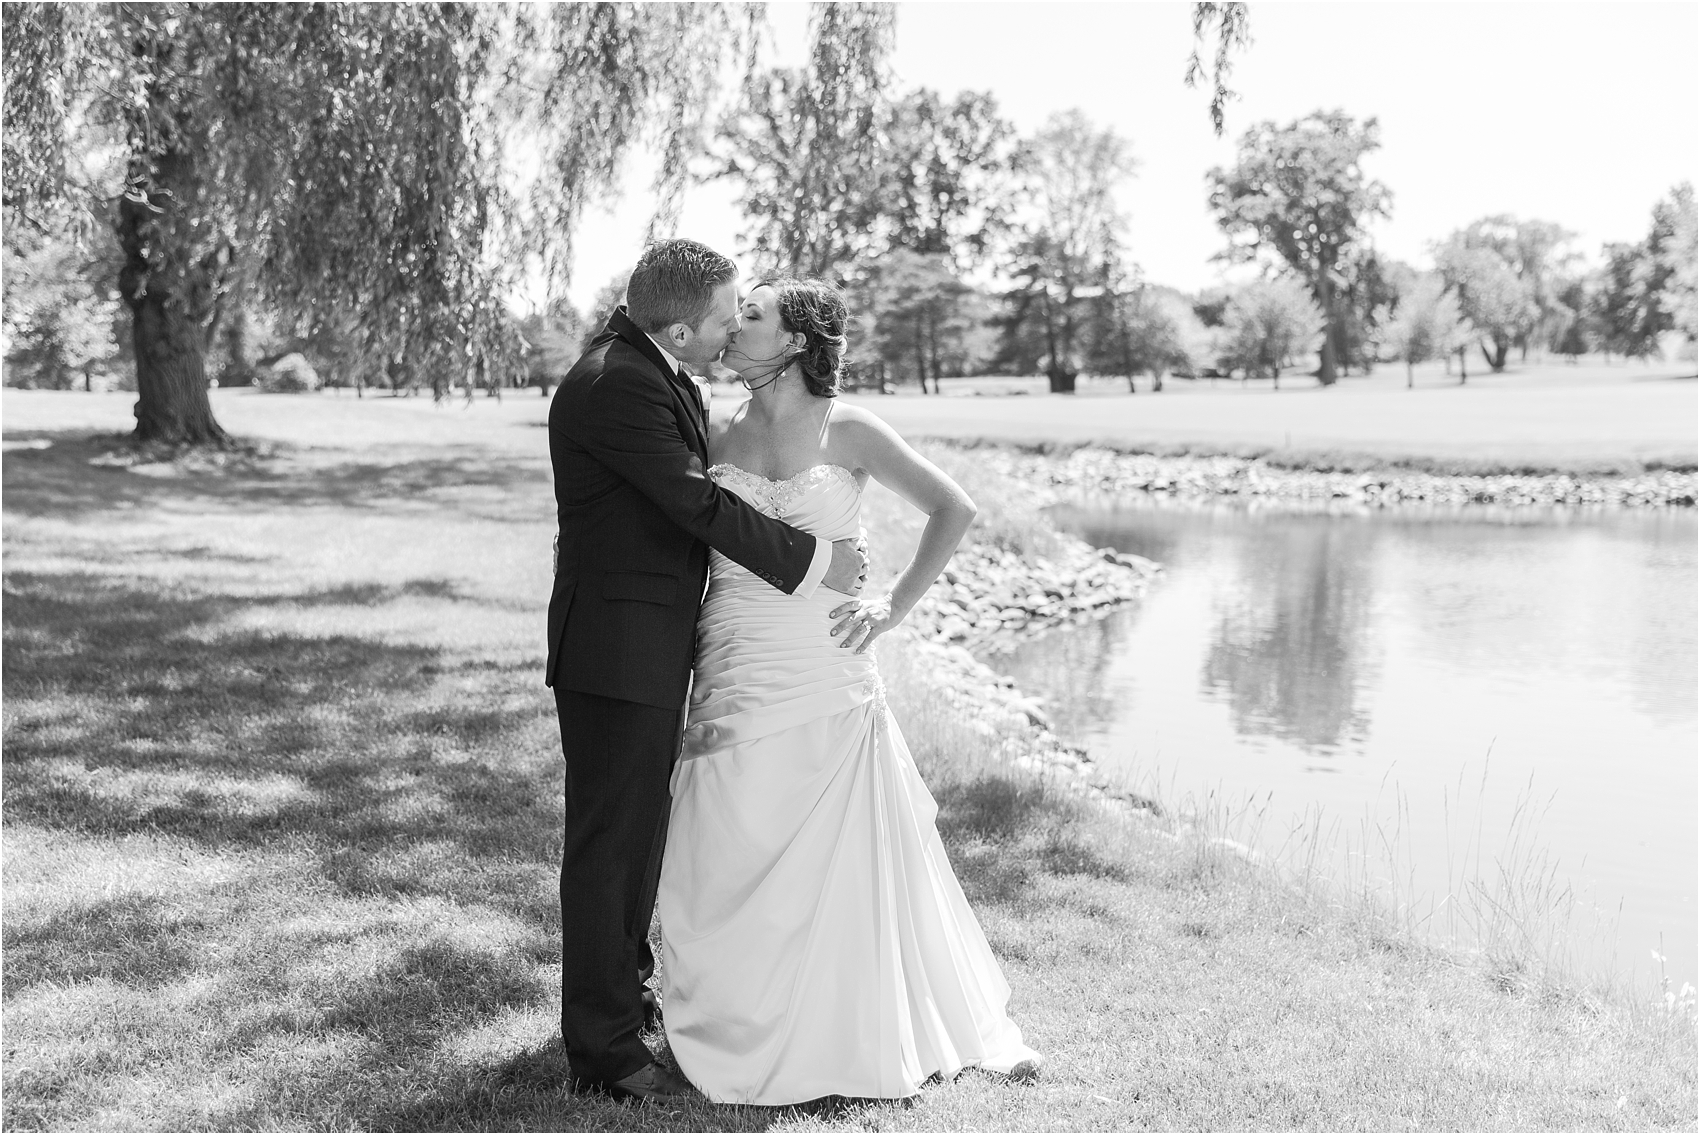 classic-wedding-photos-at-great-oaks-country-club-in-rochester-hills-mi-by-courtney-carolyn-photography_0061.jpg